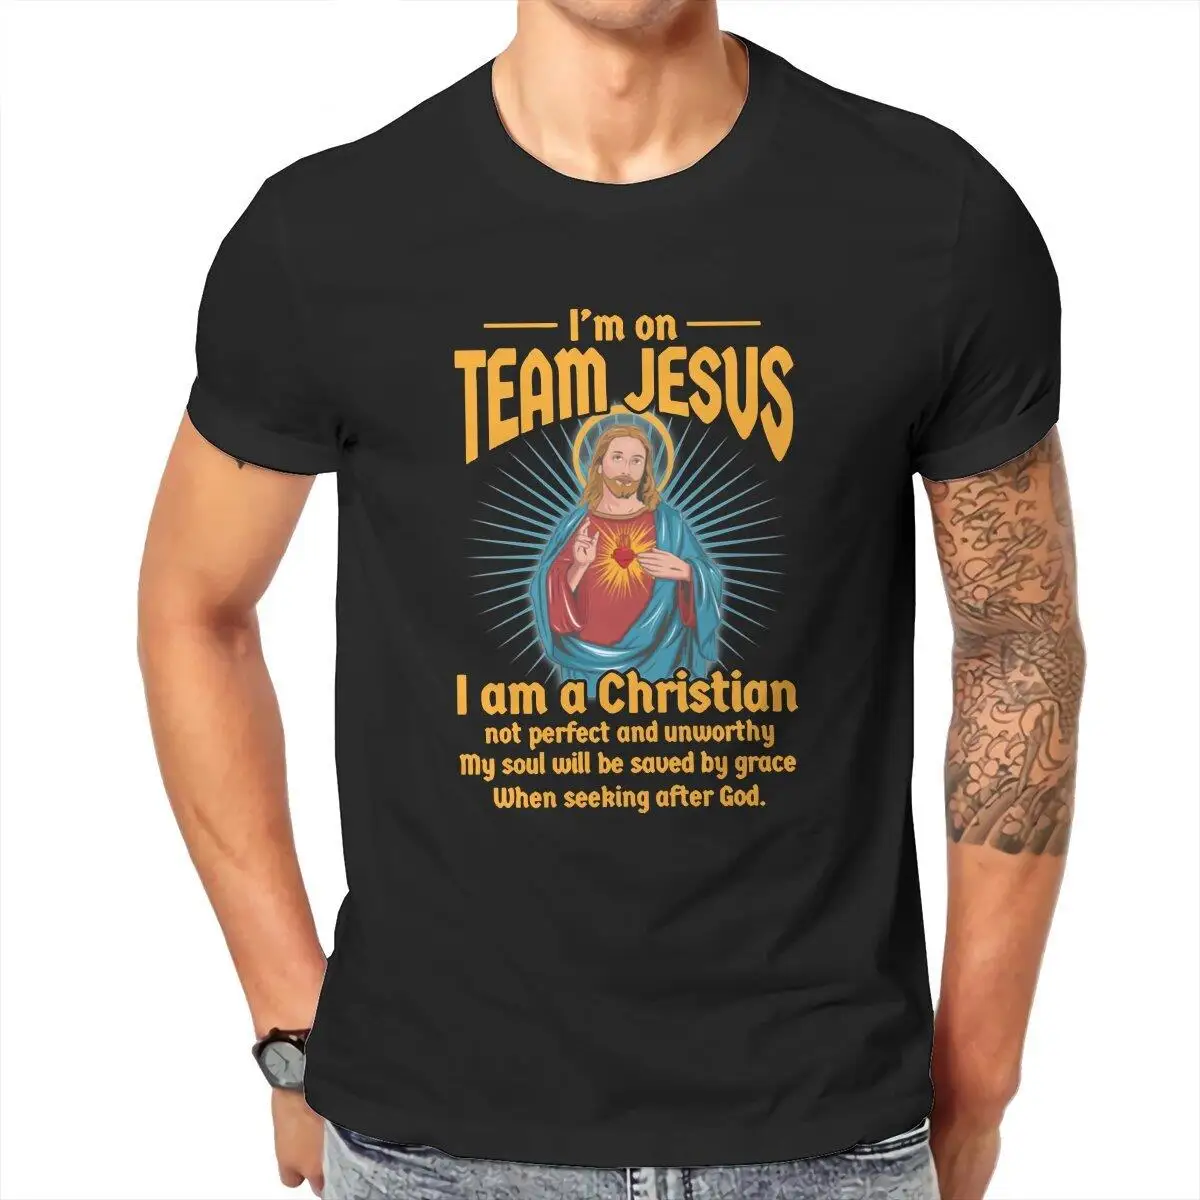 I Am on Team Jesus  T-Shirts for Men Christ Christian Religion Casual Cotton Tees Round Collar T Shirt New Arrival Tops